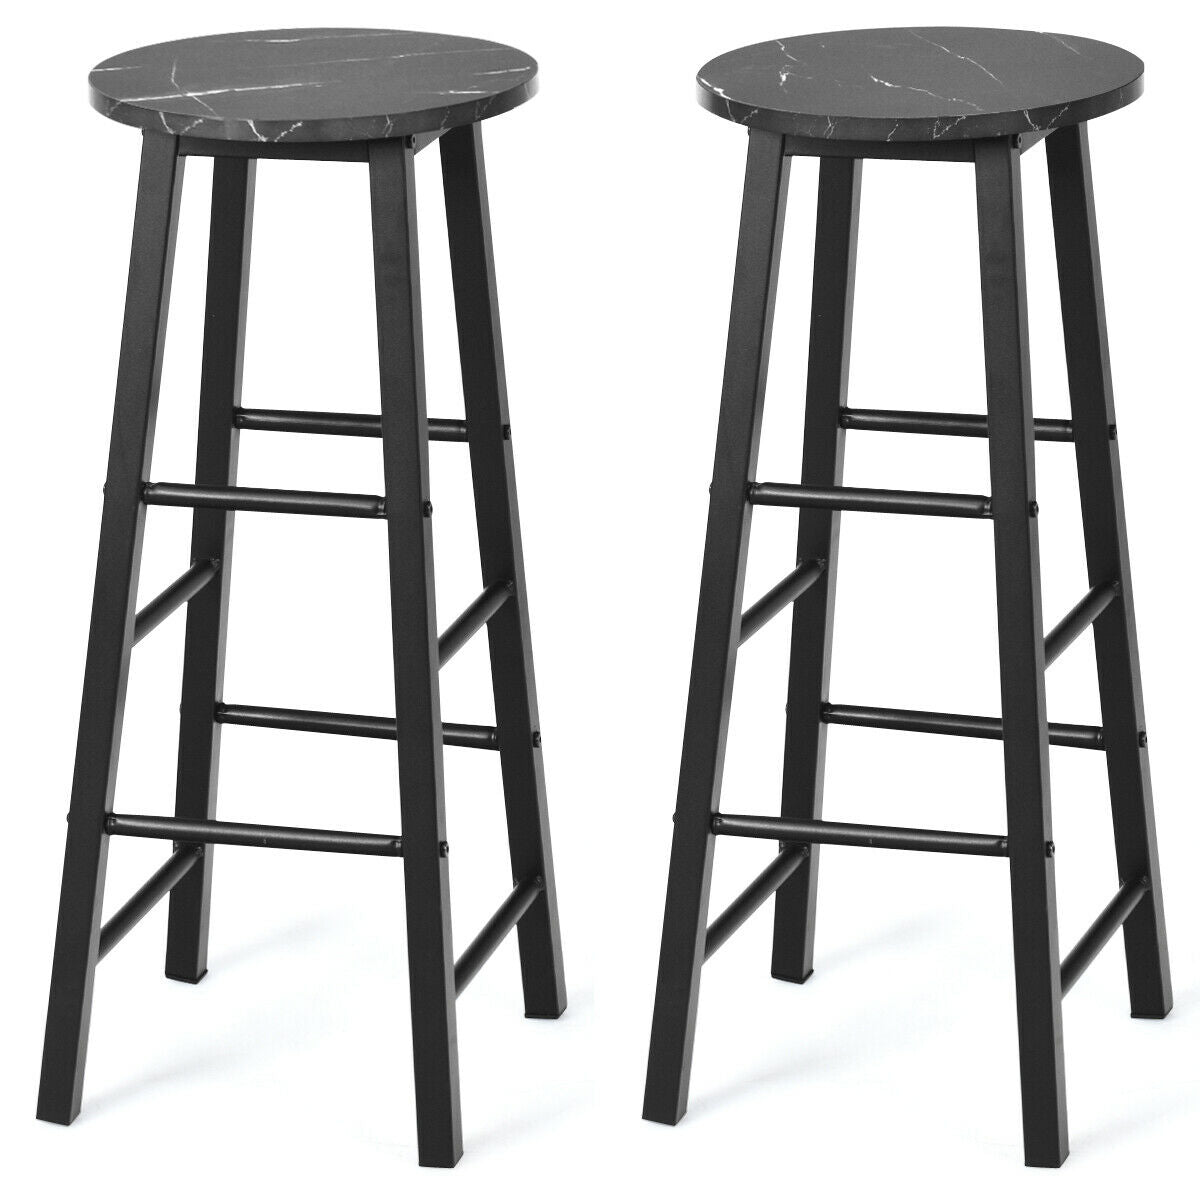 Set of 2 Faux Marble Bar Stools with Footrest and Anti slip Foot Pad Black